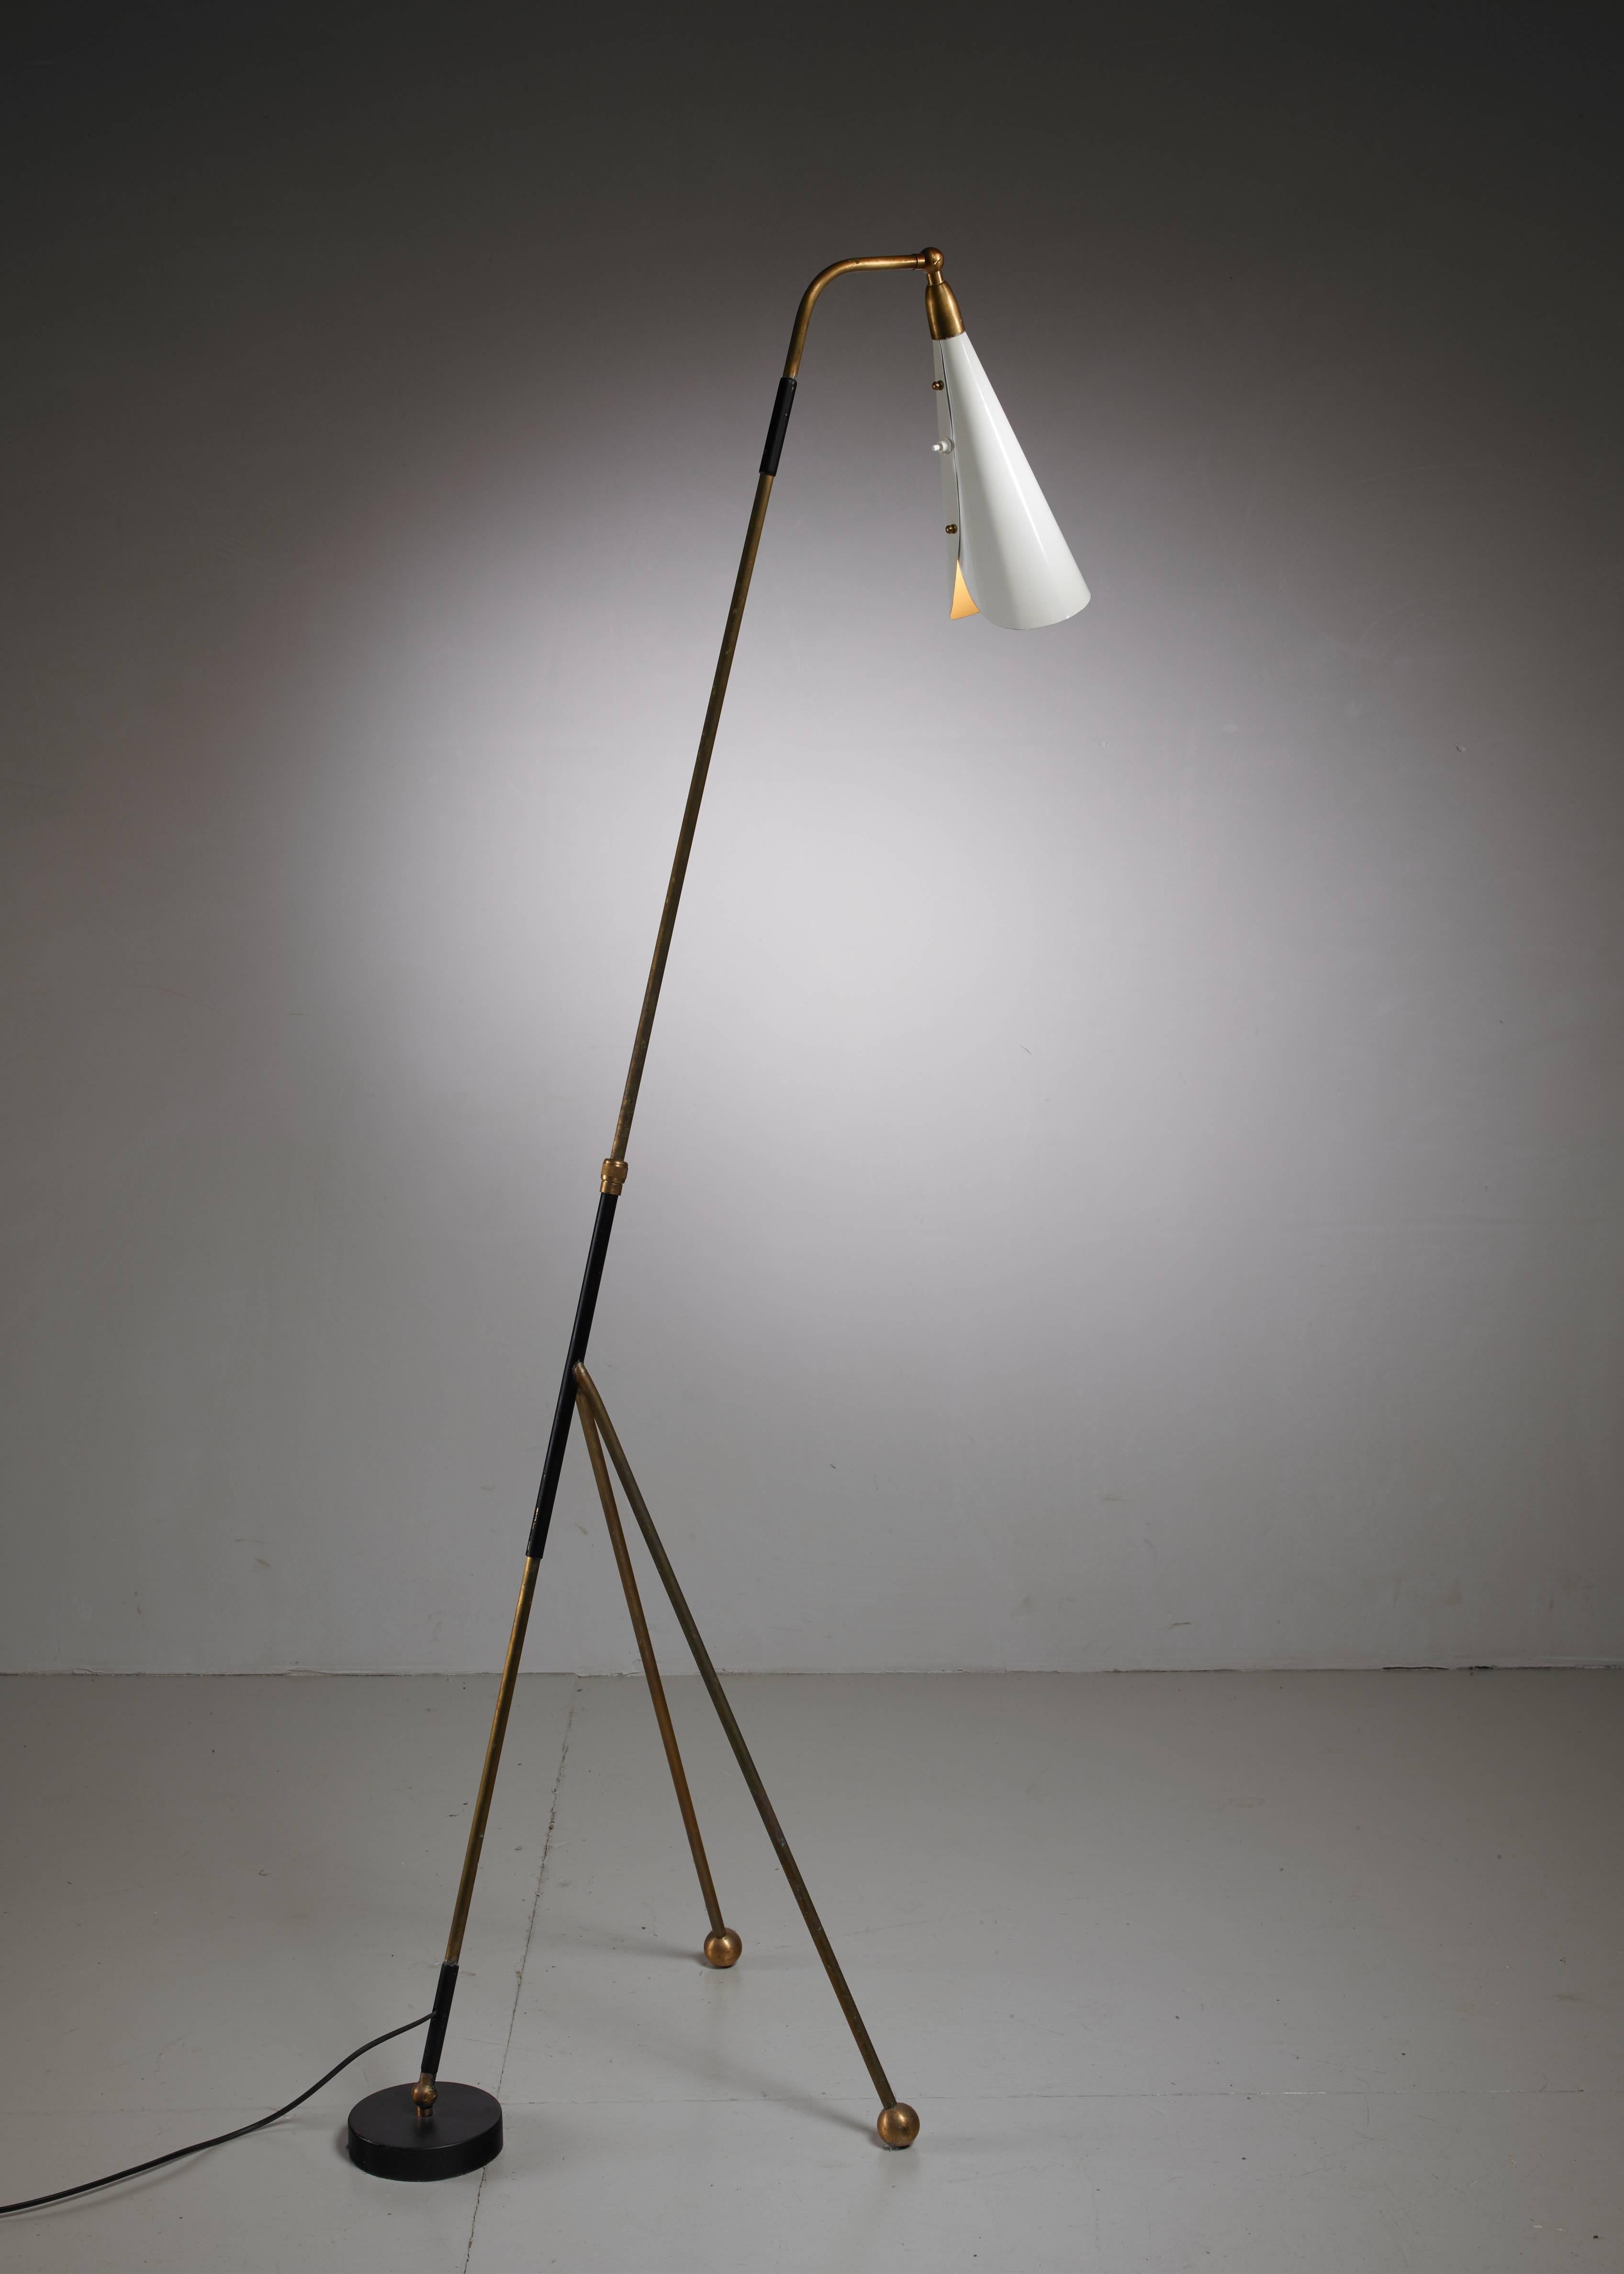 An Italian tripod floor lamp in the style of Arteluce and Arredoluce. It is made of brass with a white metal shade of which the angle can be adjusted from a 45 to 180 degrees. The counterweight at the floor keeps the lamp in position. Perfect